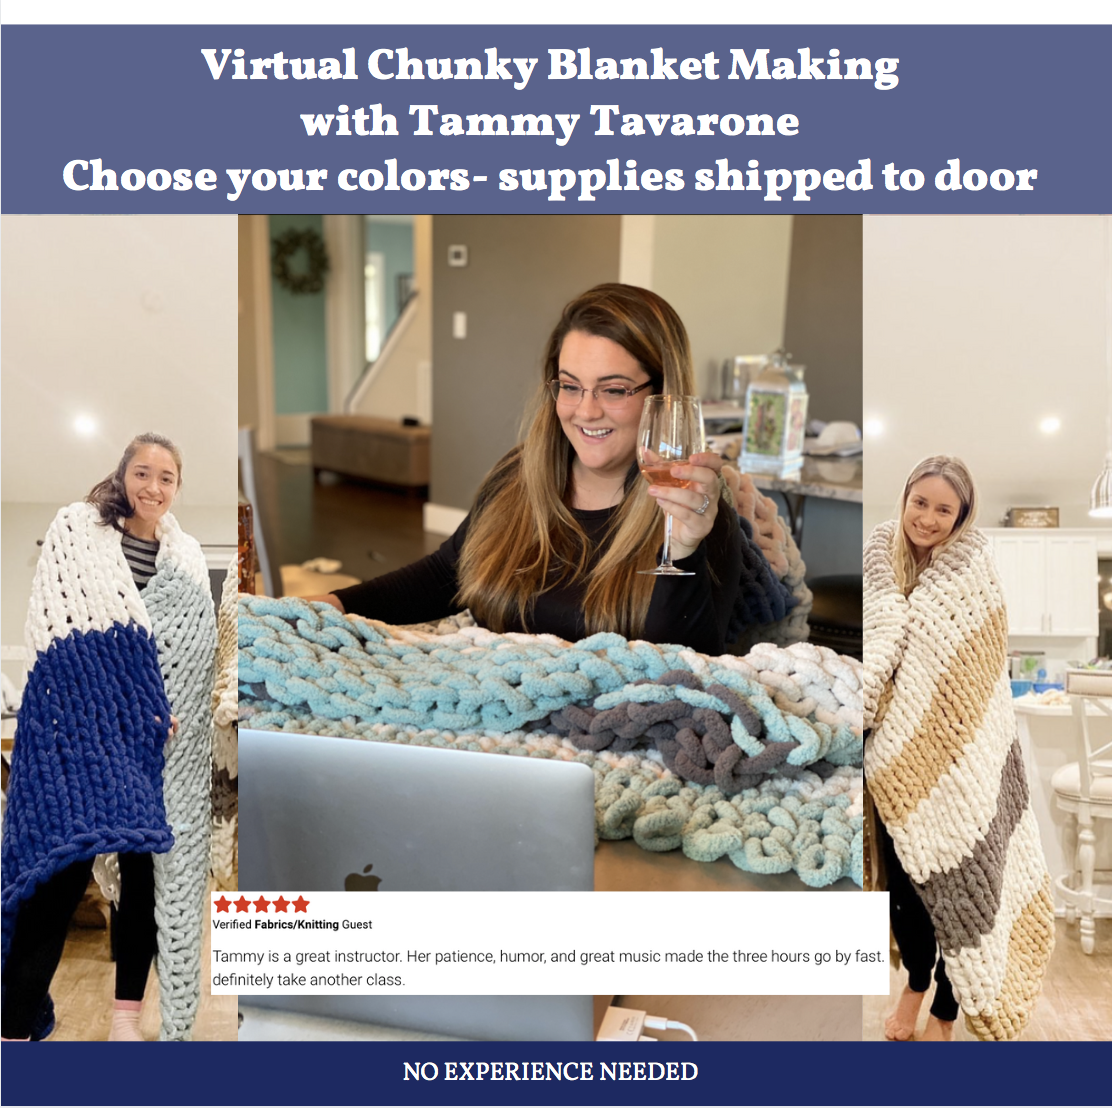 A Chunky Blanket Making with Tammy Tavarone Expert Host experience project by Yaymaker